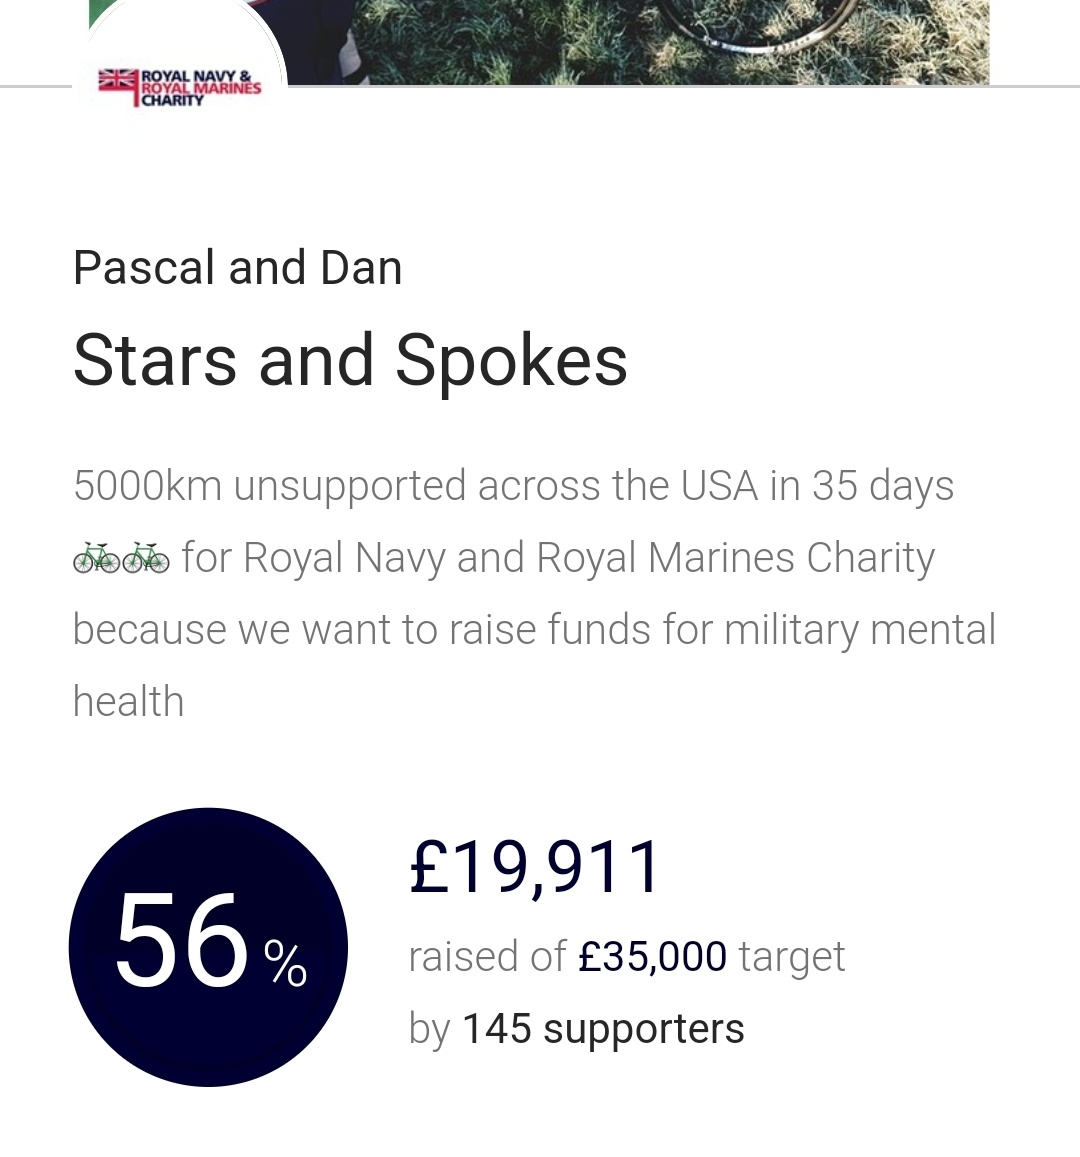 Who fancies being the legend to take us through the £20k raised barrier?! 💪 Anyone who donates gets entered into a draw to win £250 worth of @GilpinsGin - might help sway you (literally!) 😂 All funds go direct to @RNRMC #militarymentalhealth